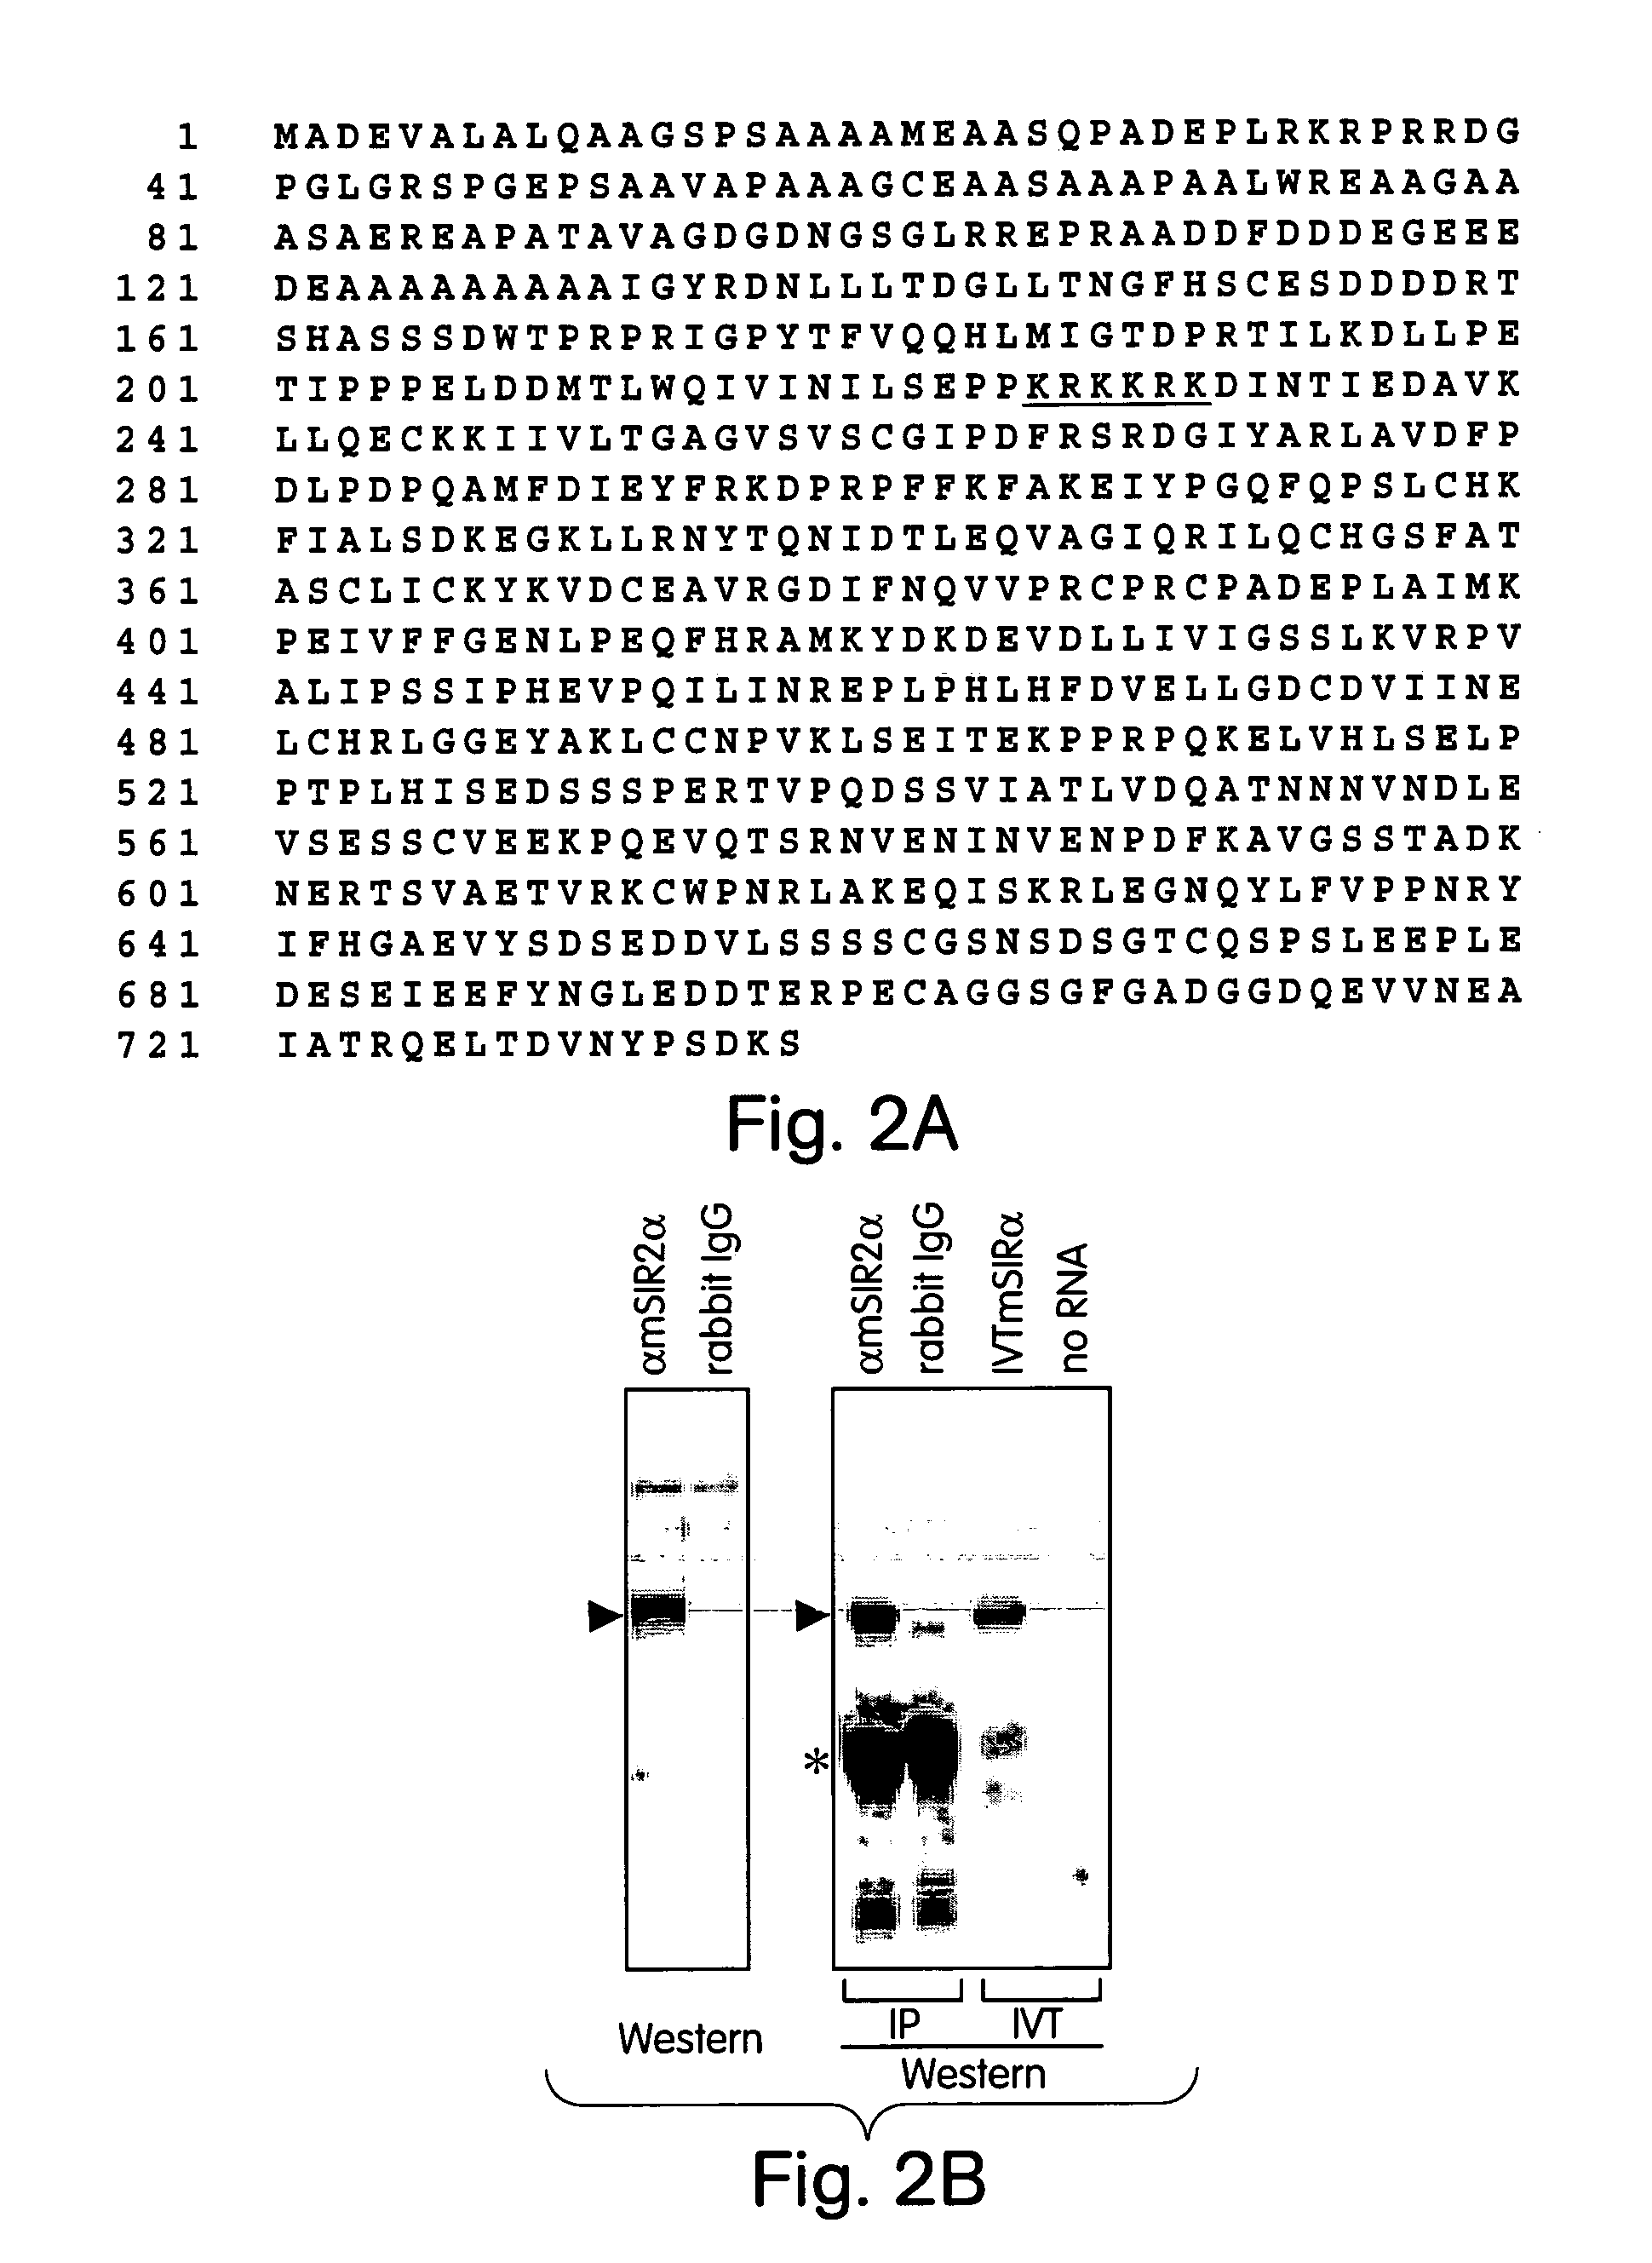 Methods for identifying agents which alter histone protein acetylation